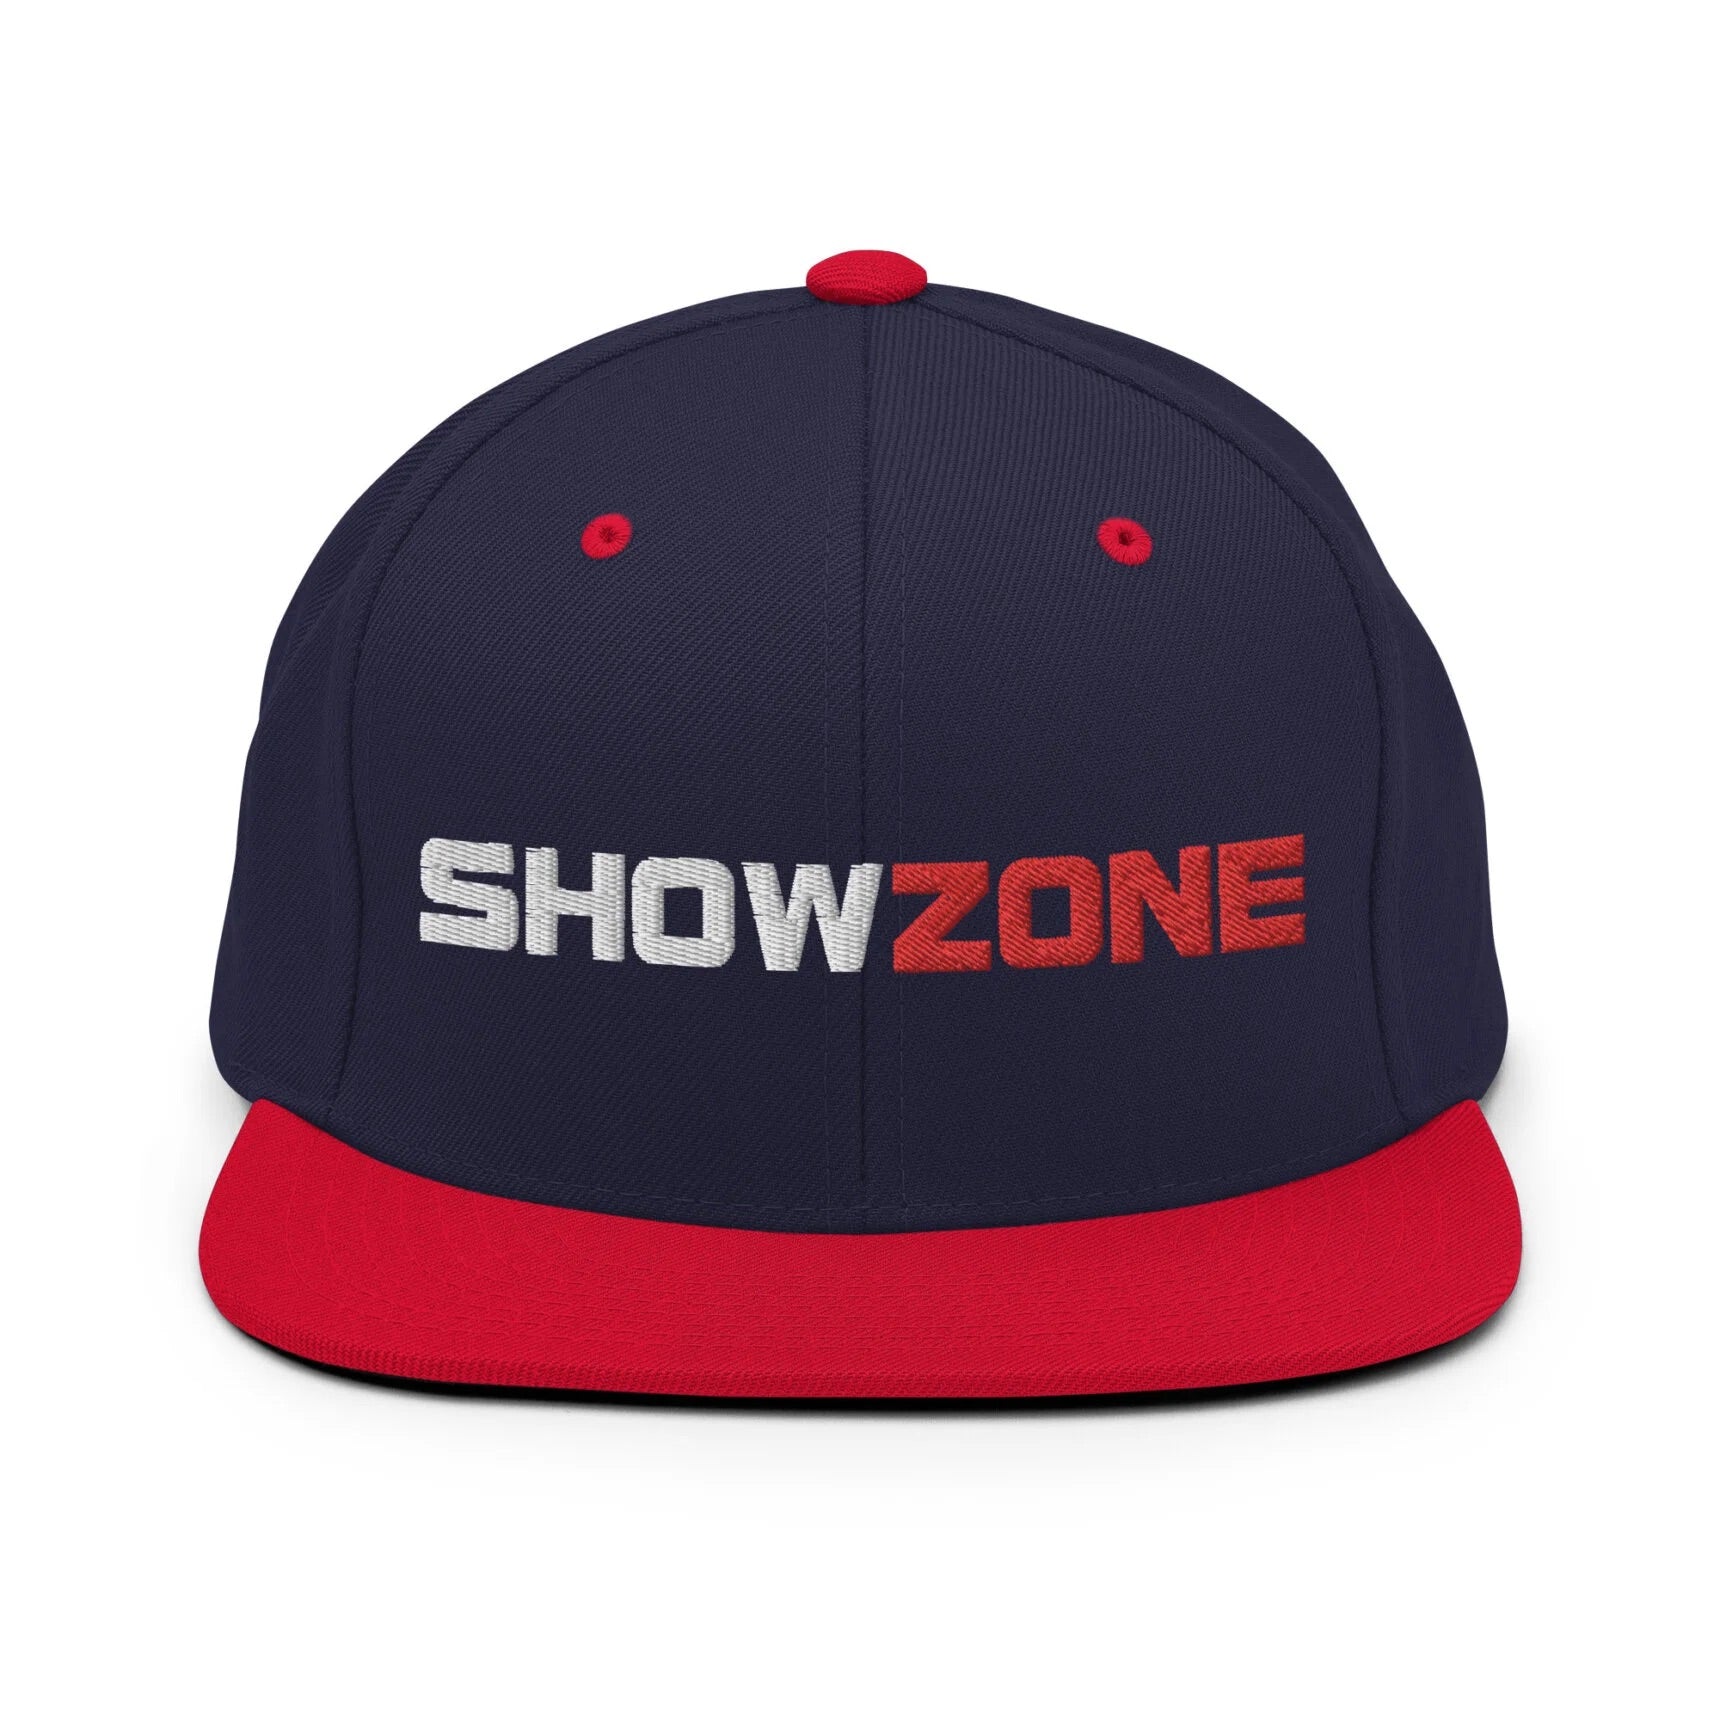 ShowZone snapback hat in navy with text logo and red brim accents